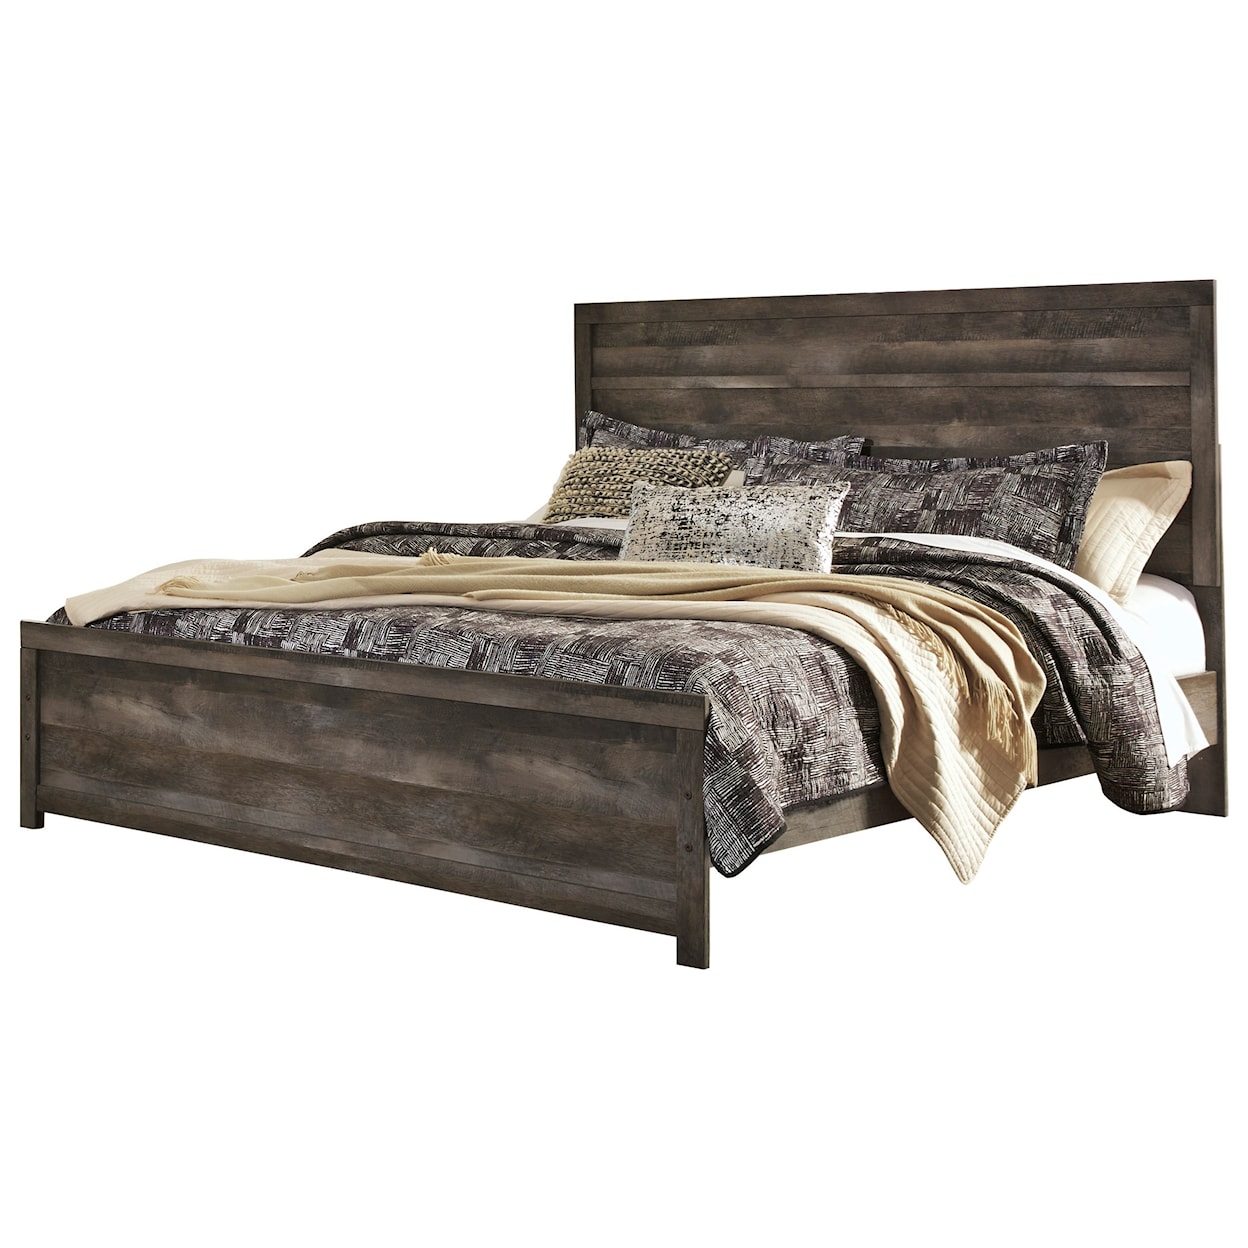 Signature Design by Ashley Wynnlow King Panel Bed